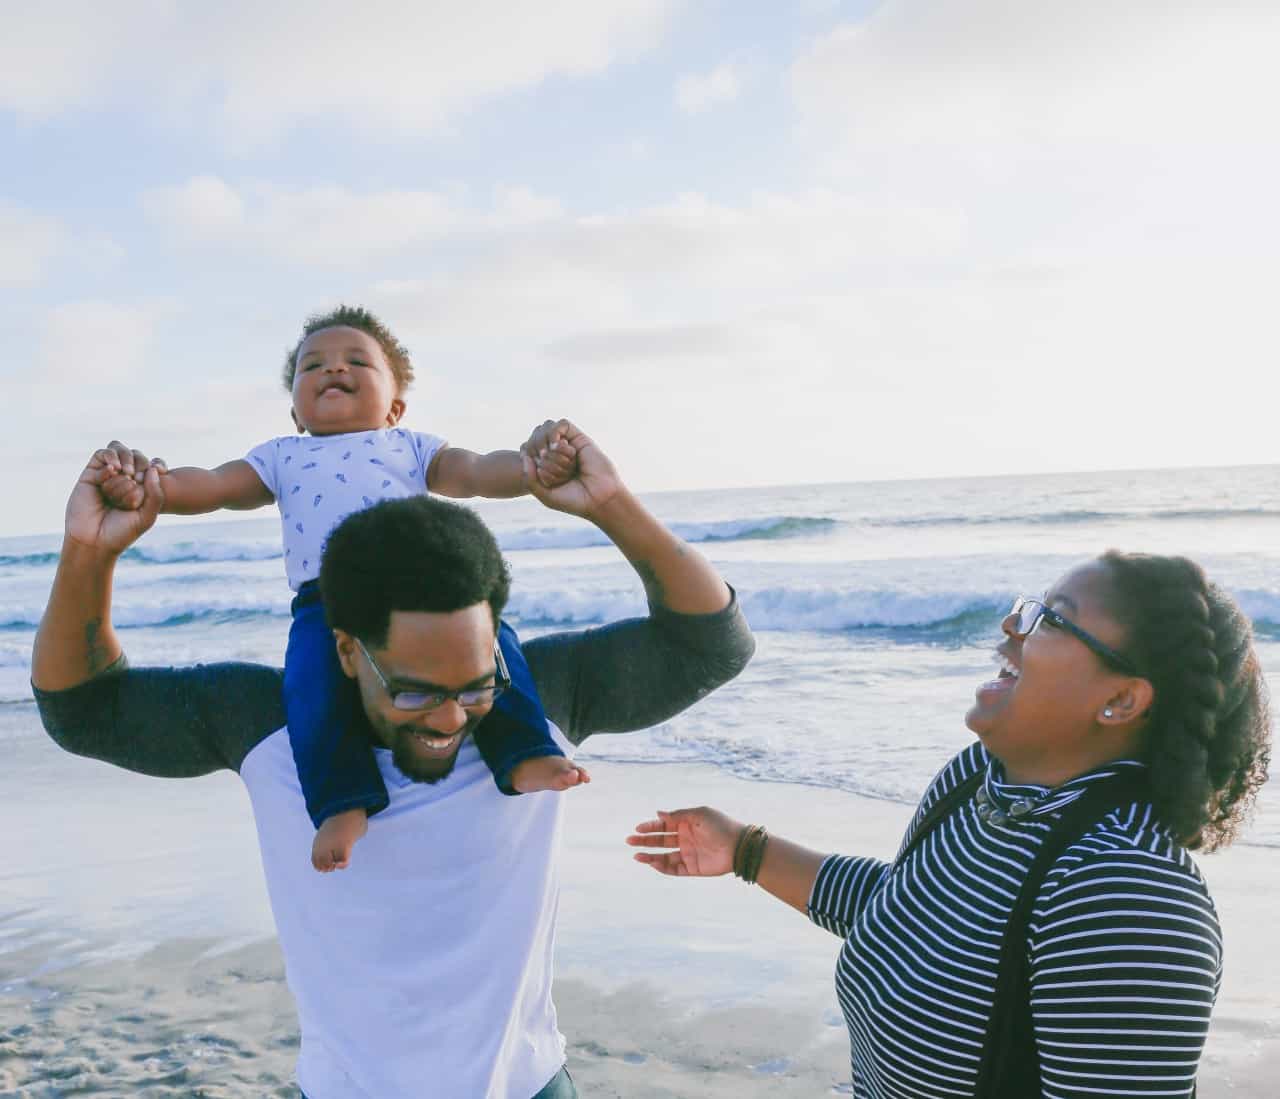 A dad with his baby son sitting on his shoulders and a Mom laughing while they stand on a beach.